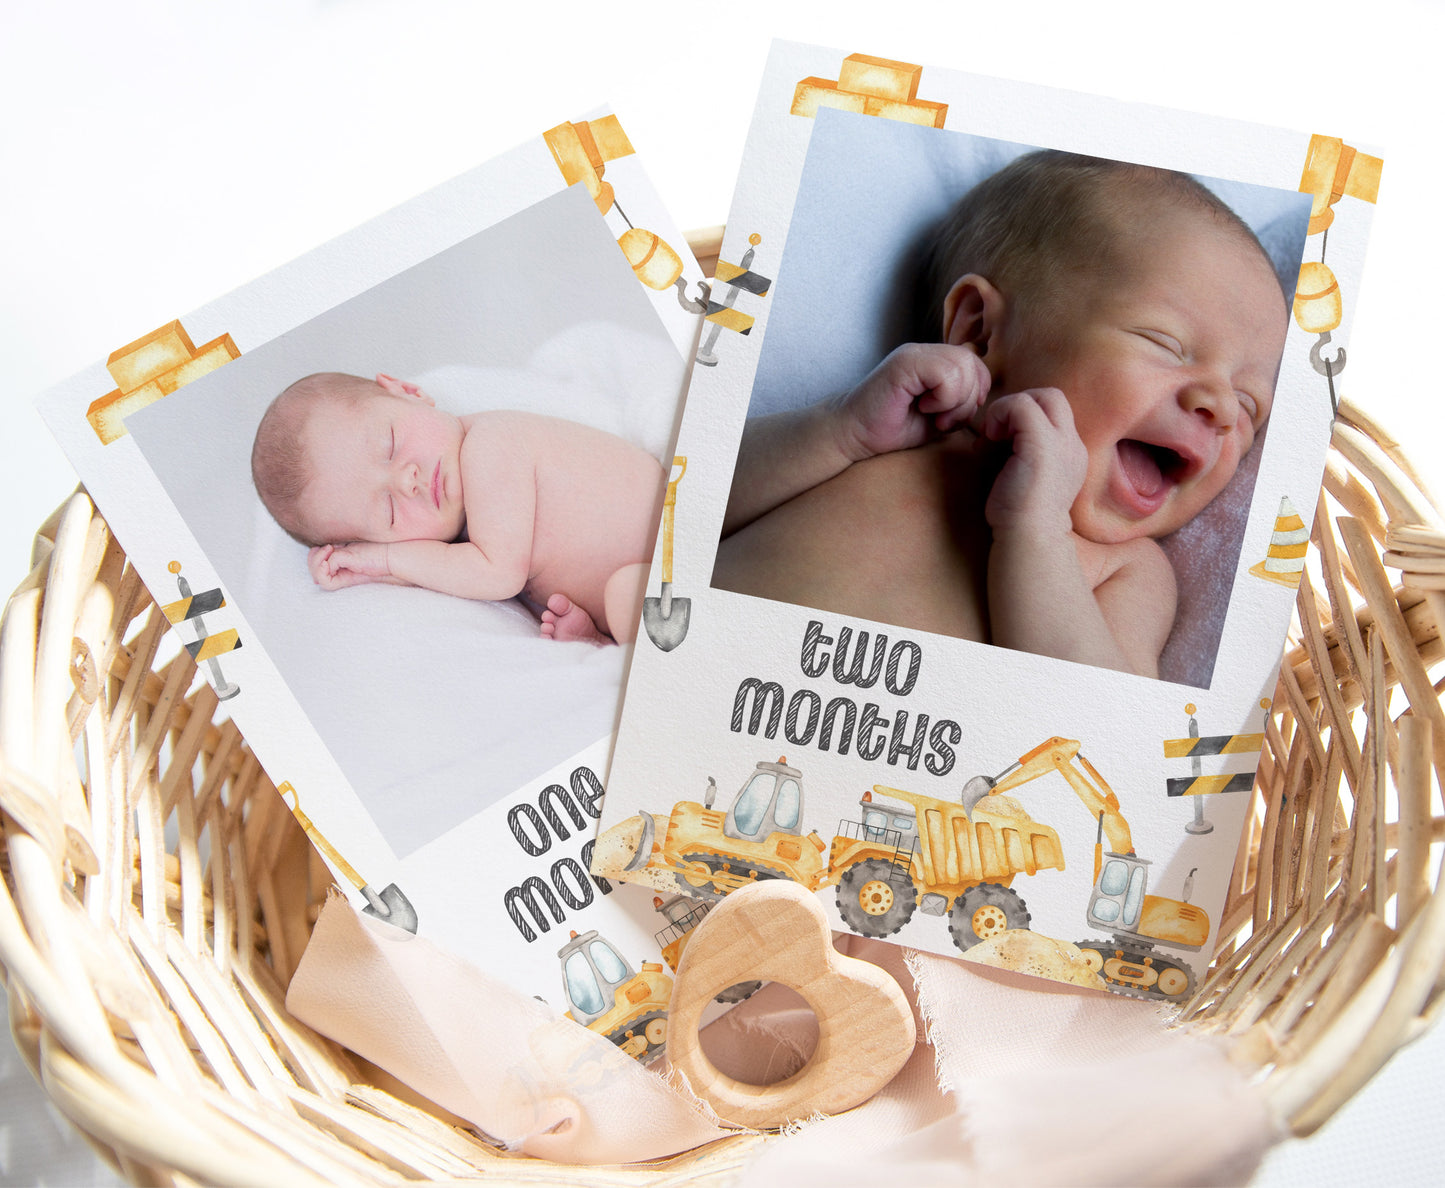 Editable Construction Monthly Banner | Dump Truck 1st Birthday Decorations - 07A